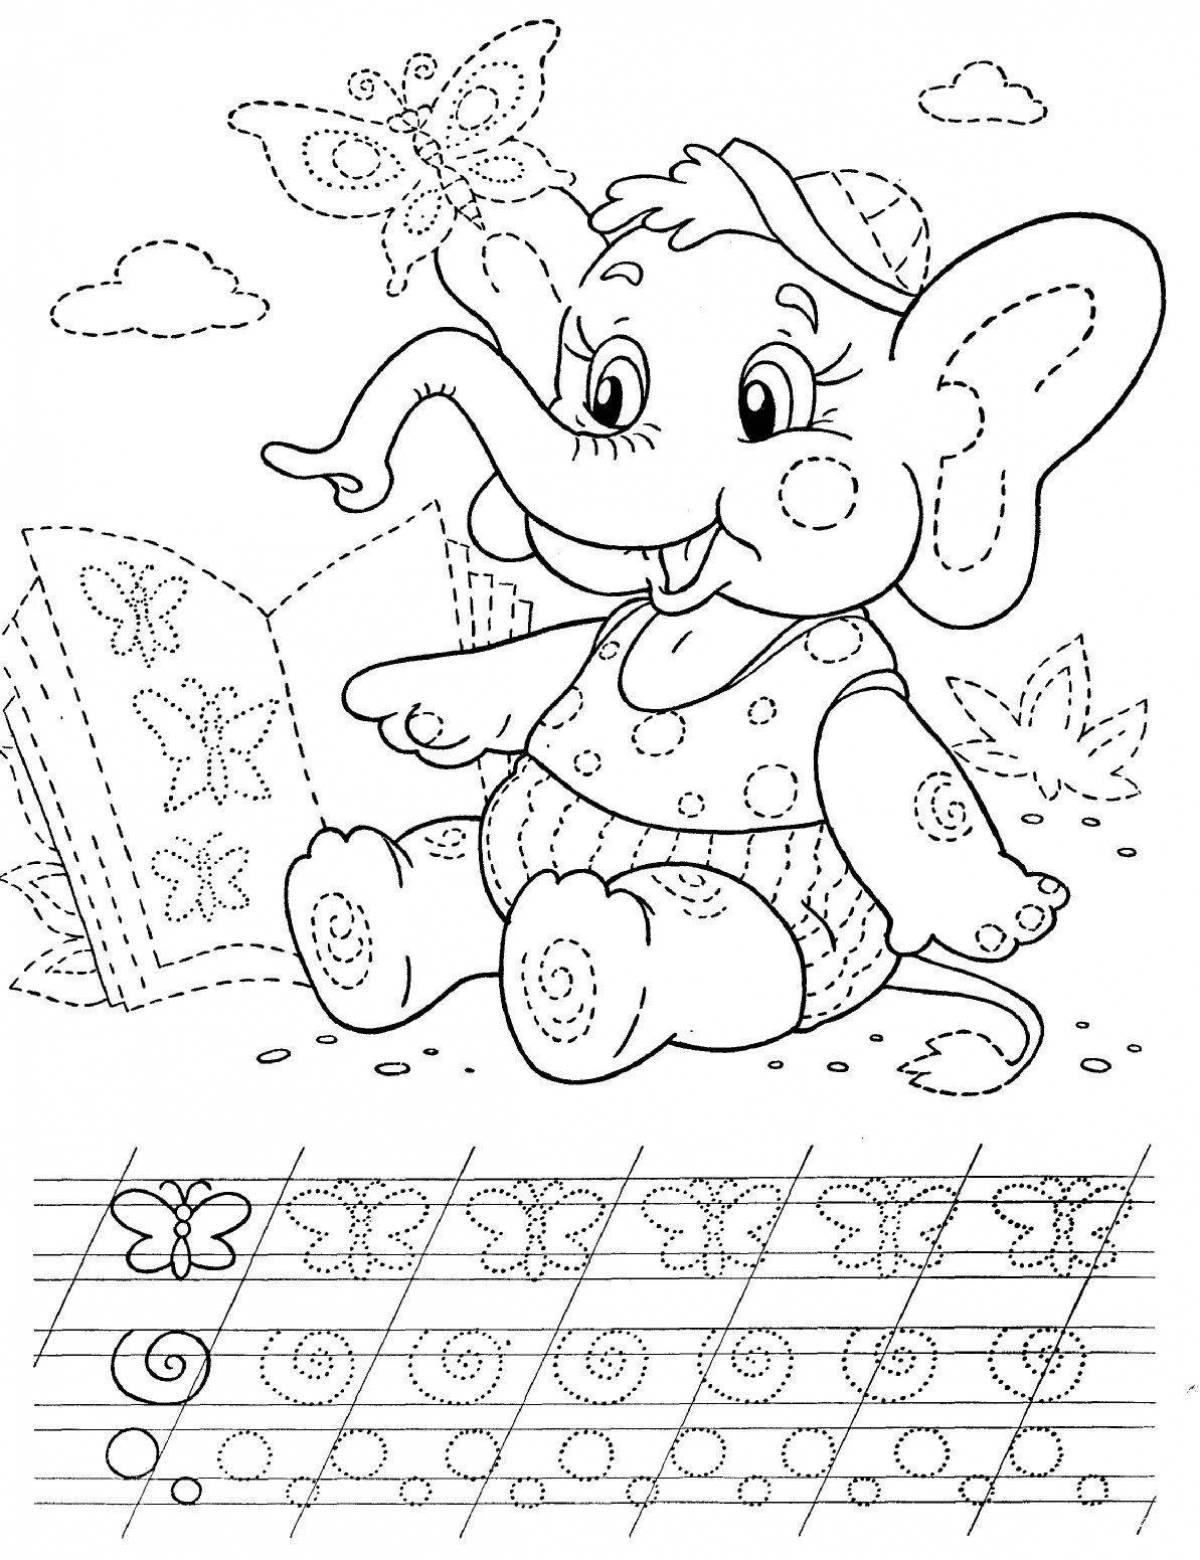 Adorable recipe coloring book for 3-4 year olds